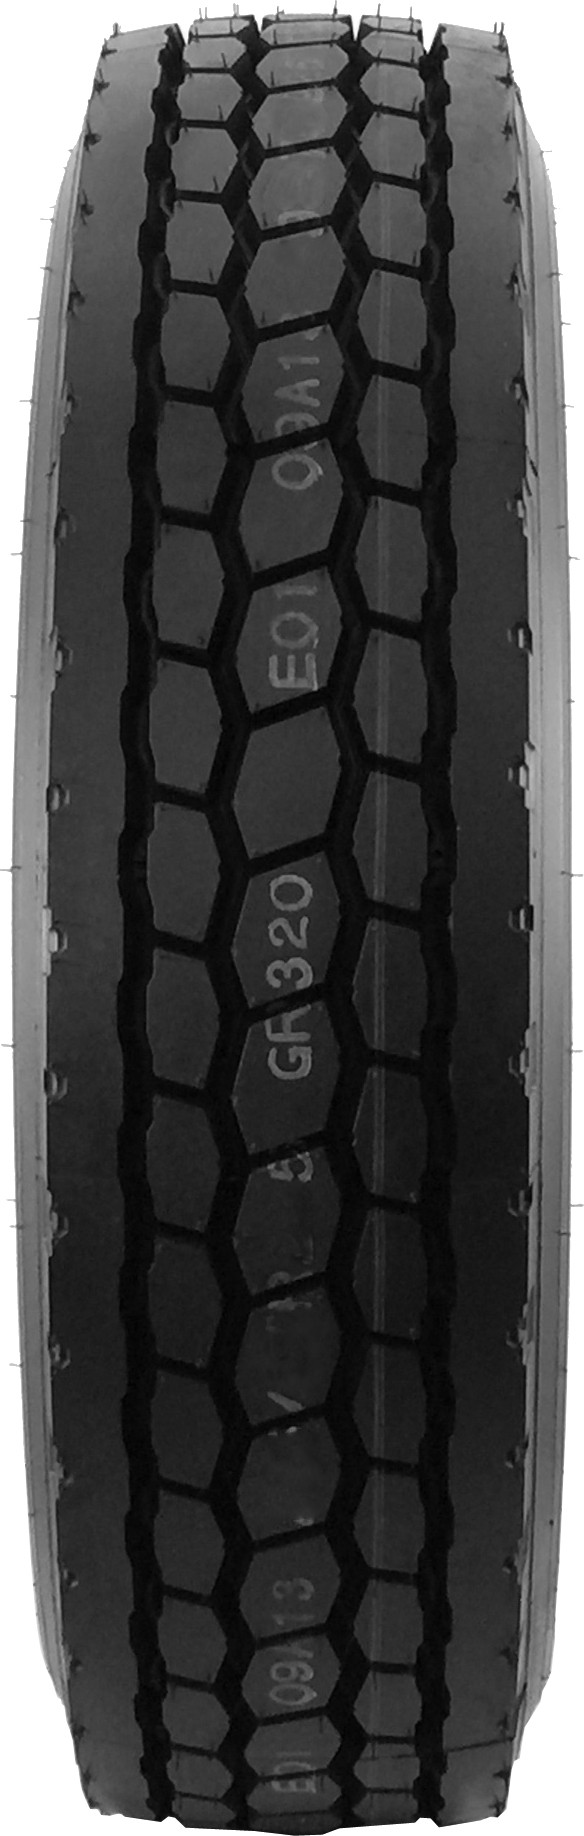 295/75R22.5 ROAD CREW GR320 DRIVE TIRES 4 NEW 16 PLY 4-TIRES 